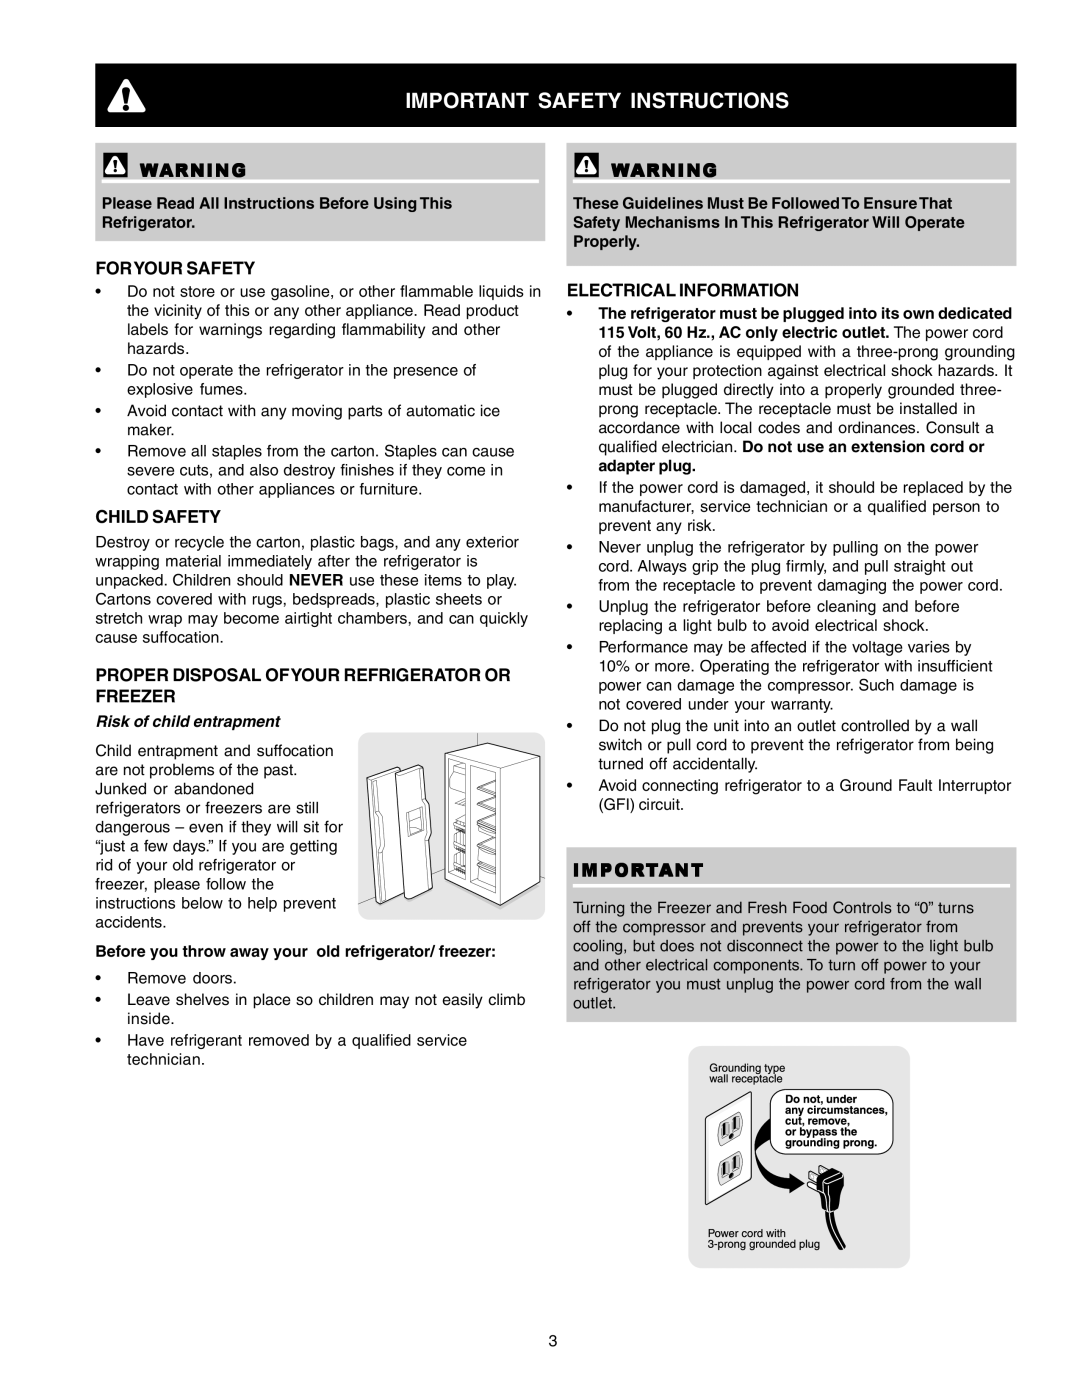 Frigidaire FRS23F5AB5, FRS6R5ESB7 Important Safety Instructions, Foryour Safety, Child Safety, Electrical Information 